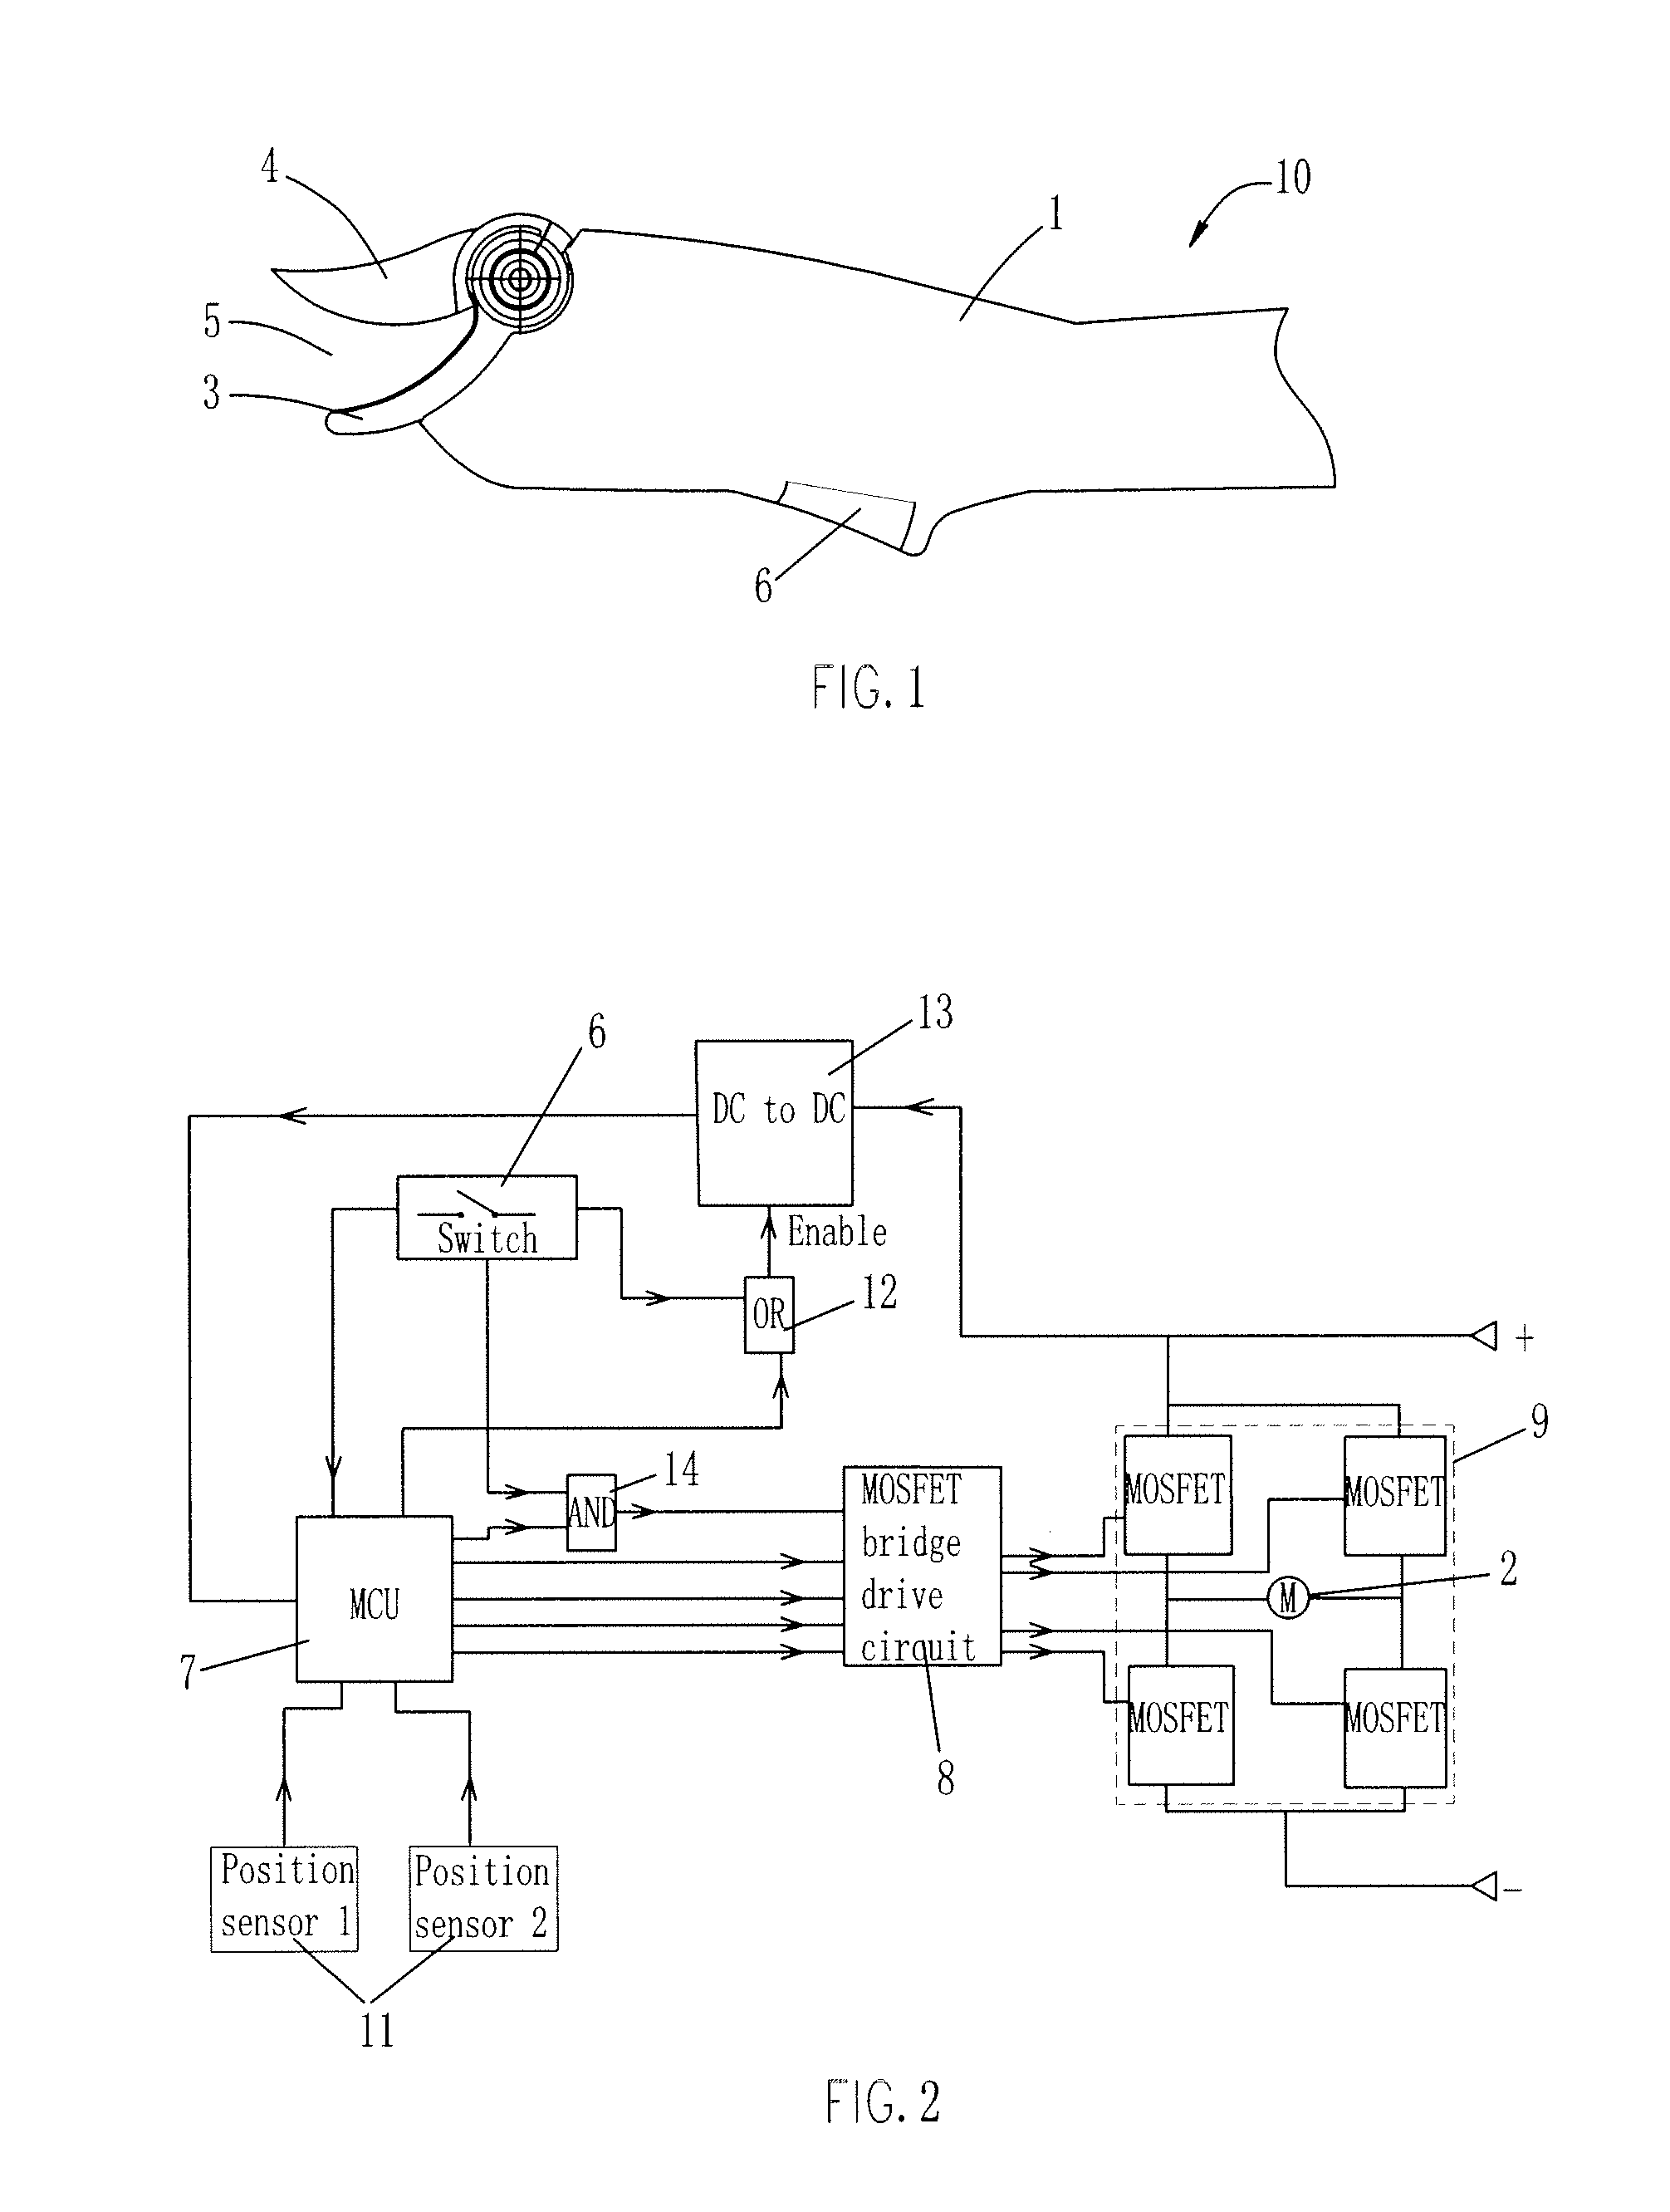 Control method for motor-driven shears